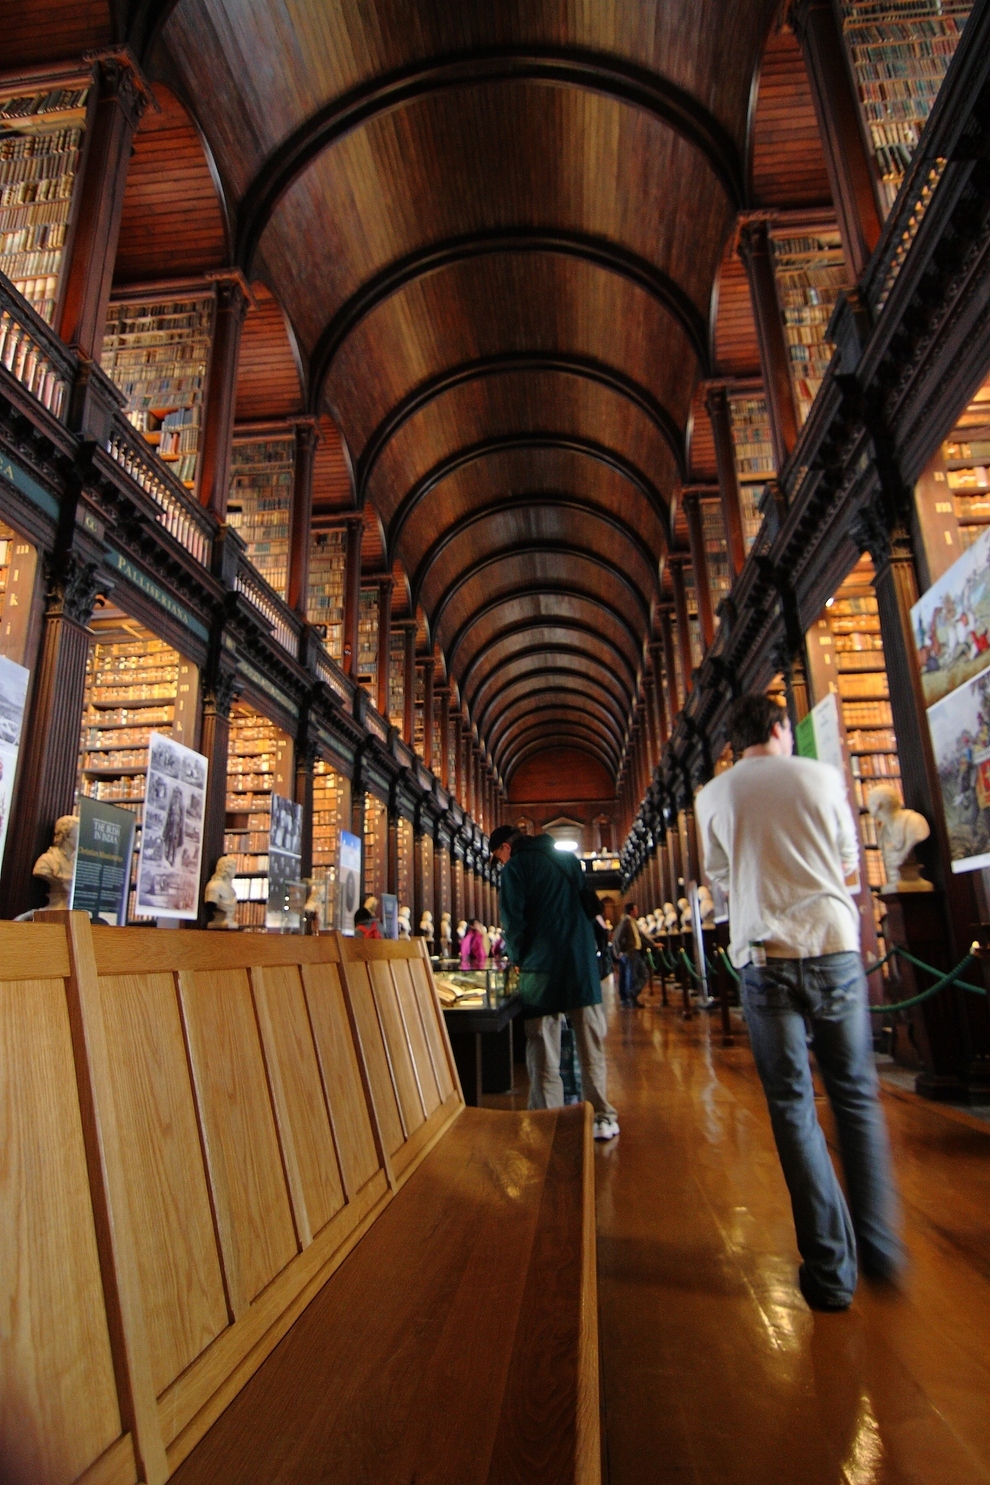 The Long Room at Trinity College: